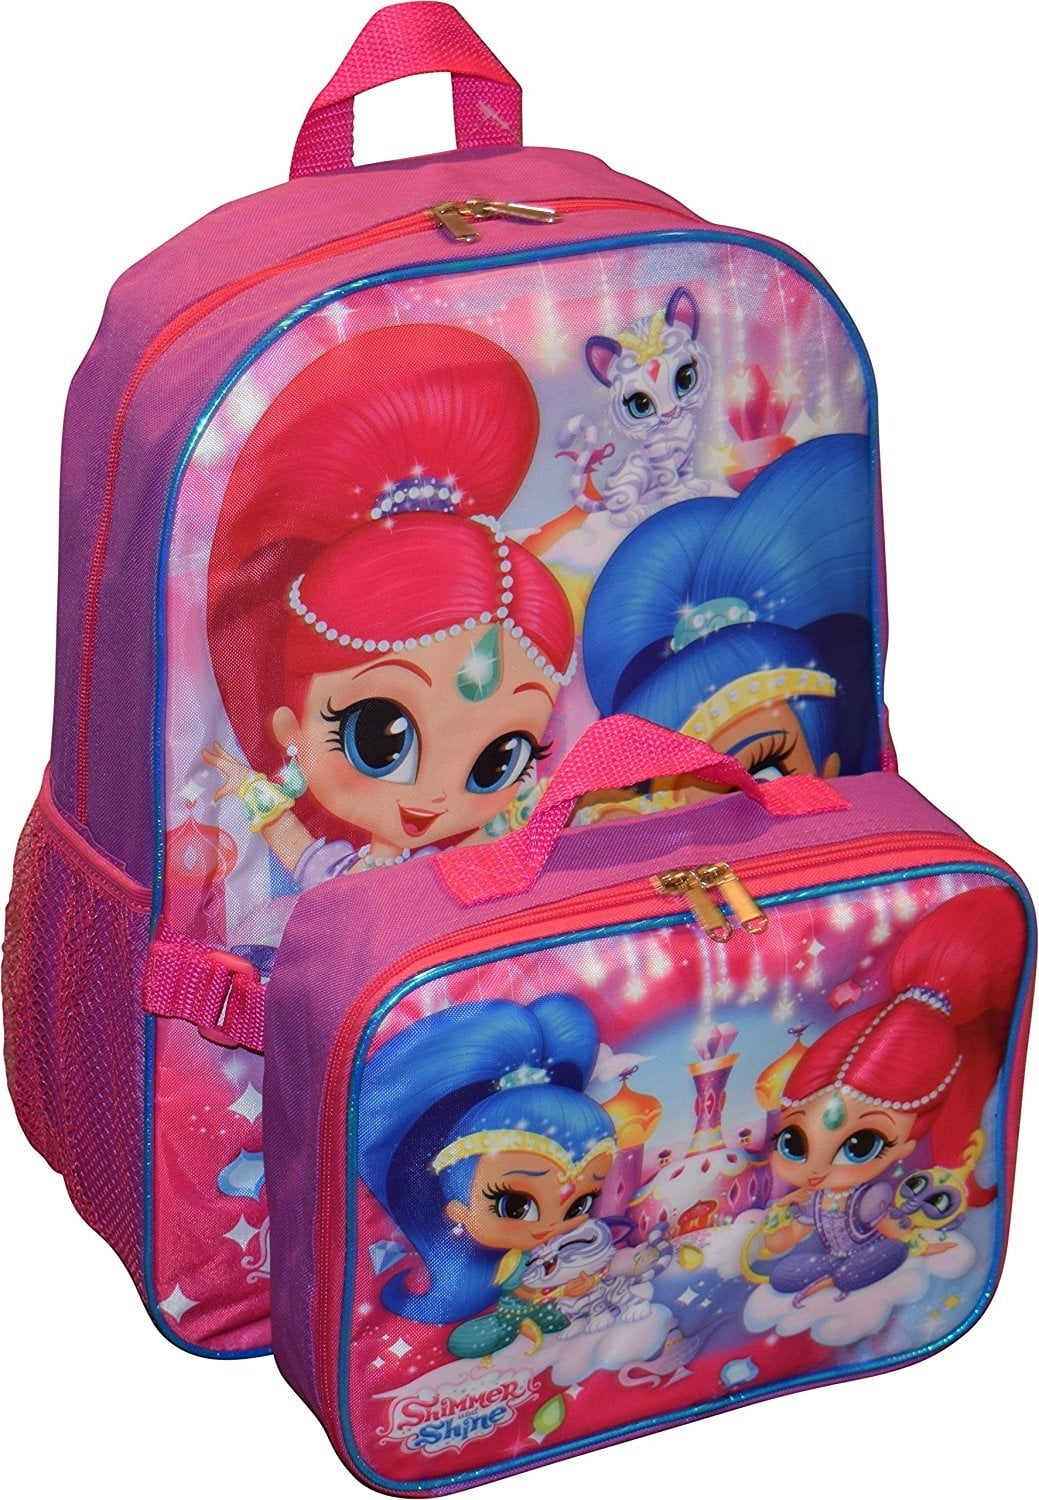 Nickelodeon Shimmer and Shine Pink Girls Pink 16"  Large Backpack 